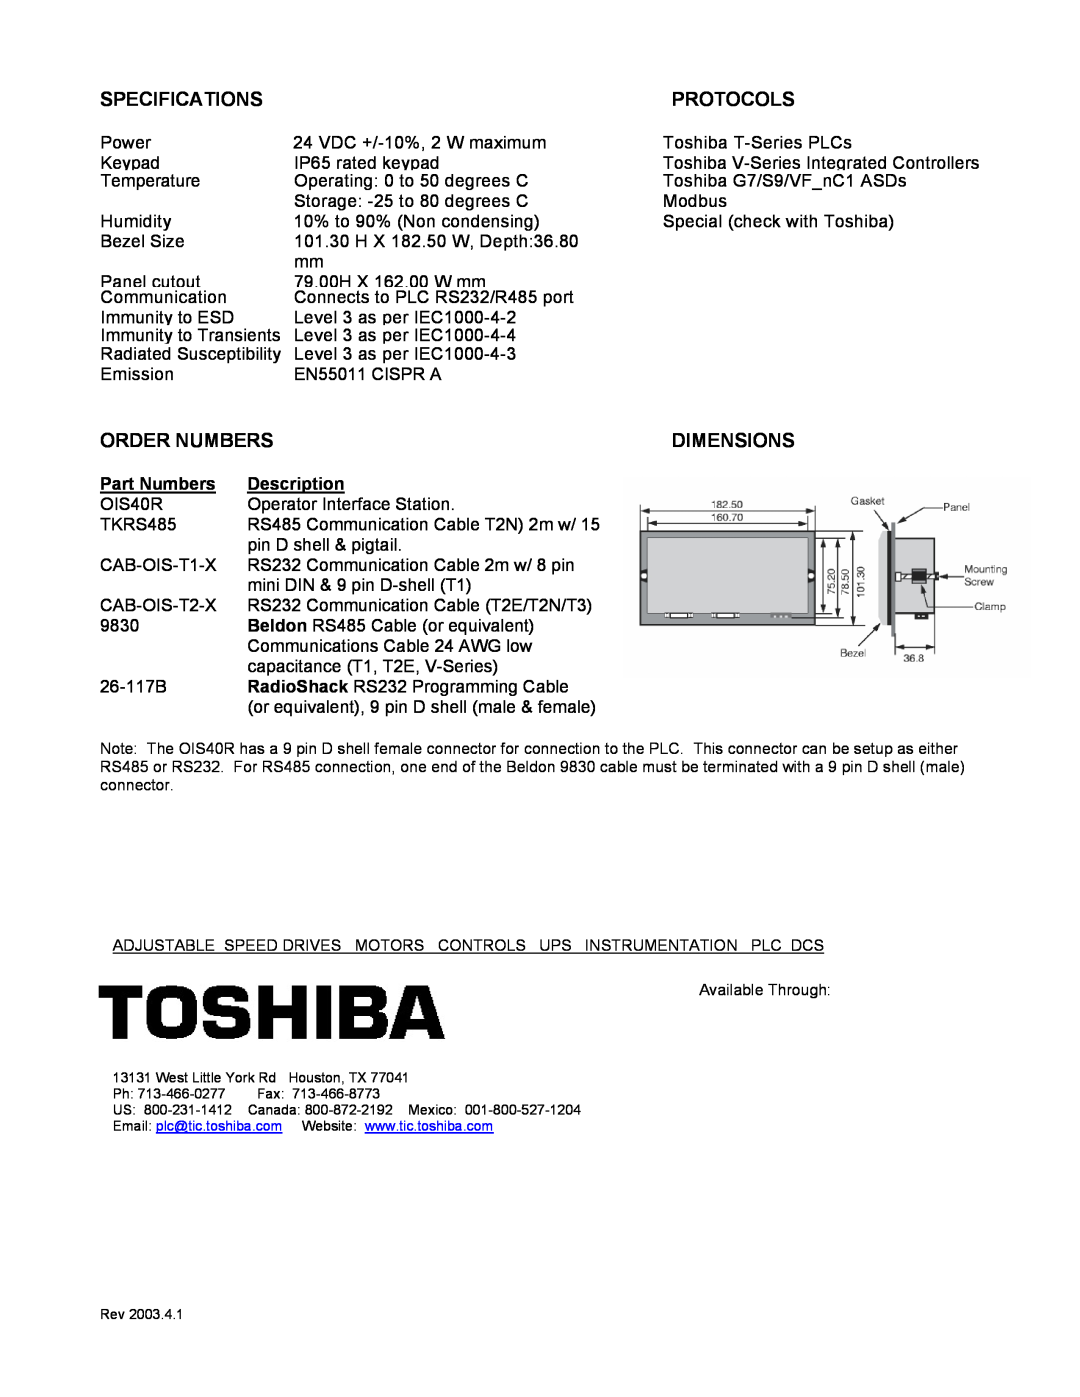 Toshiba OIS40R manual Specifications, Protocols, Order Numbers, Dimensions, Part Numbers, Description 